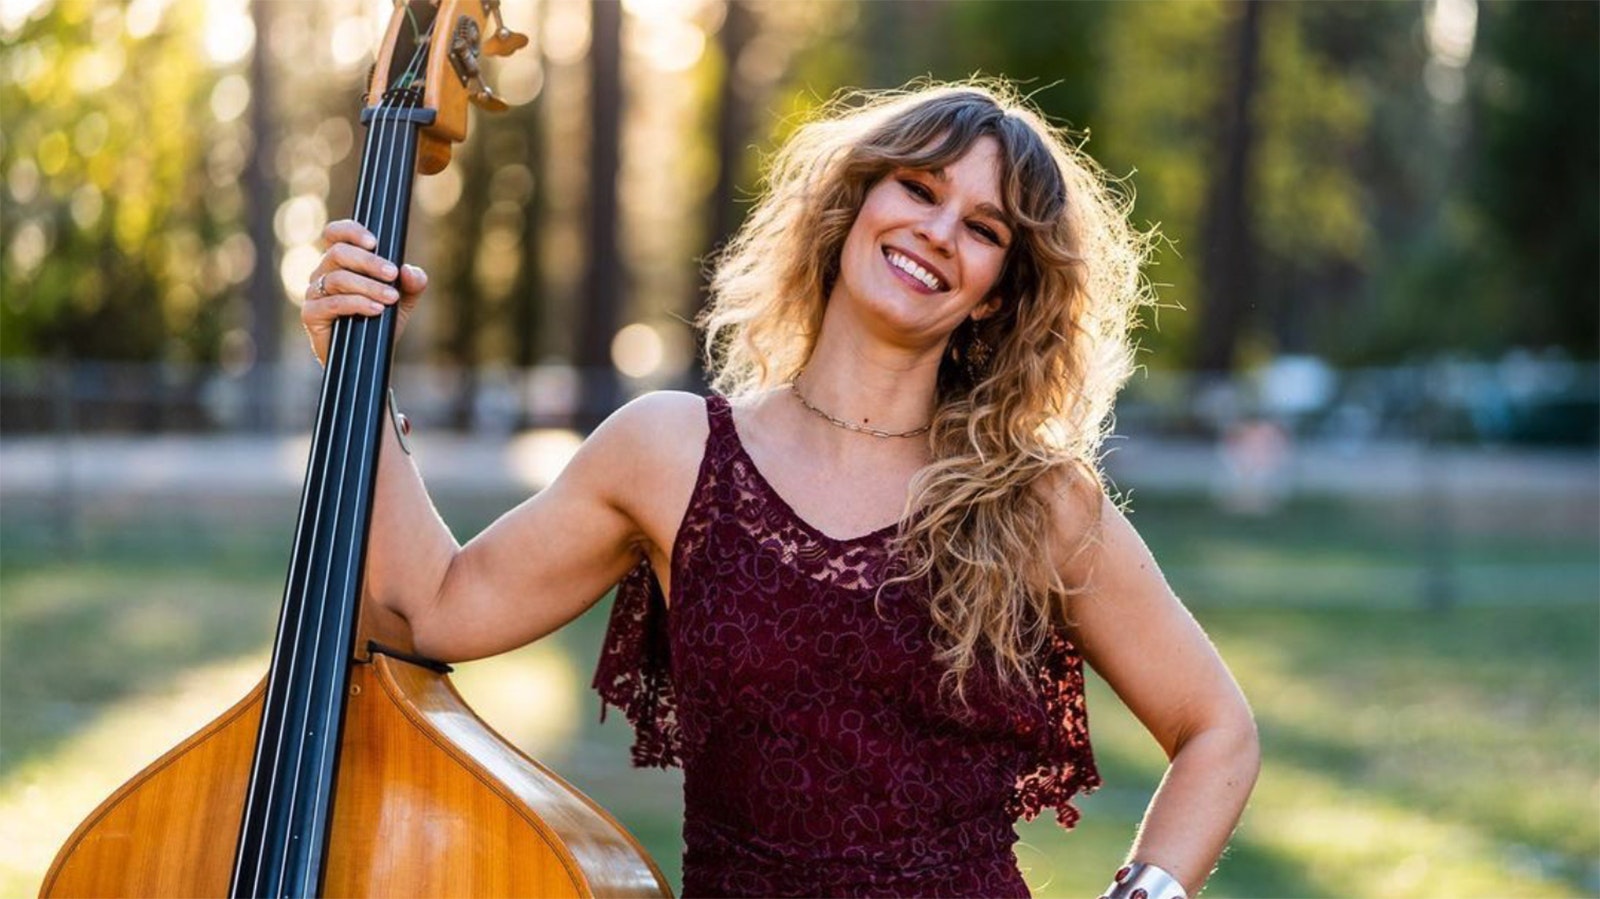 Shelby Means grew up in Laramie, Wyoming, and has risen to the top of the bluegrass music scene, playing bass in Molly Tuttle's Golden Highway Band, which just won the Grammy for Best Bluegrass Album.